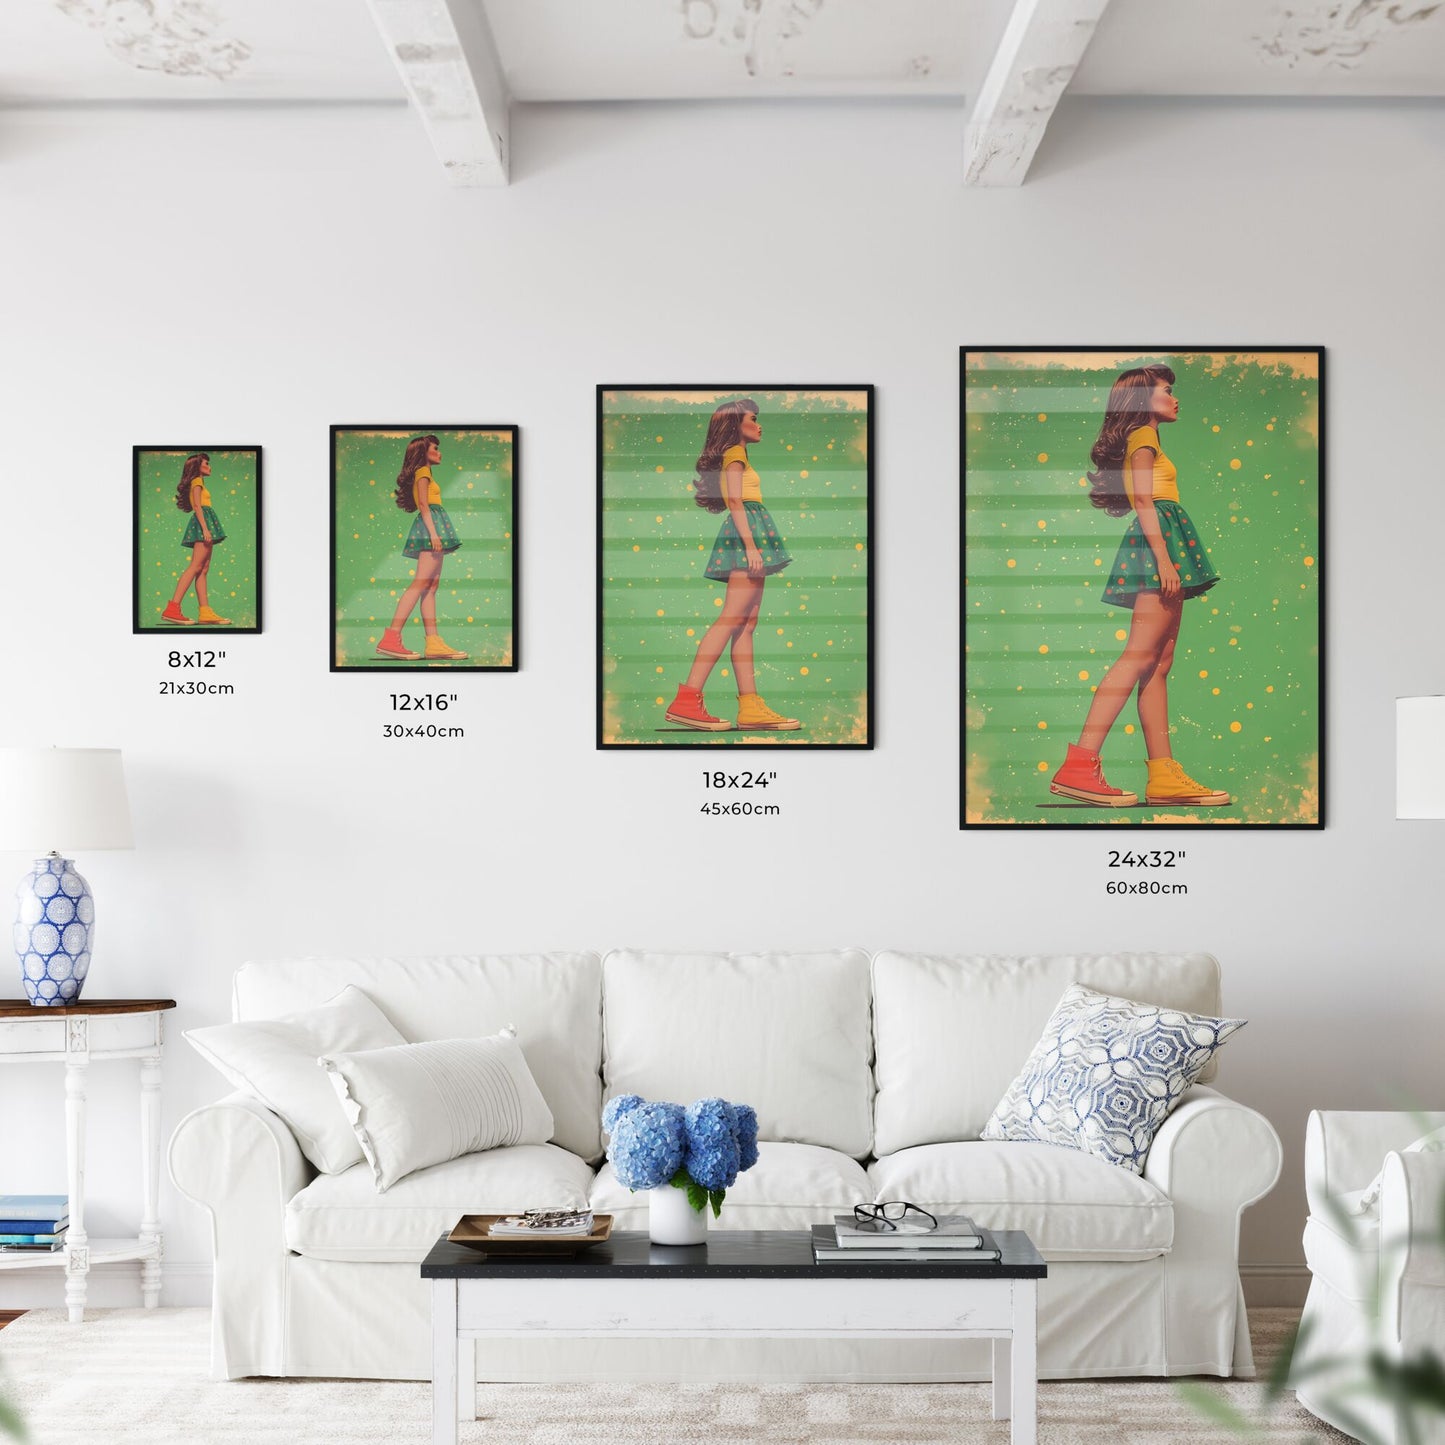 Side profile, illustrative, large outlines, beautiful pin up girl - Art print of a woman in a green skirt and yellow boots Default Title